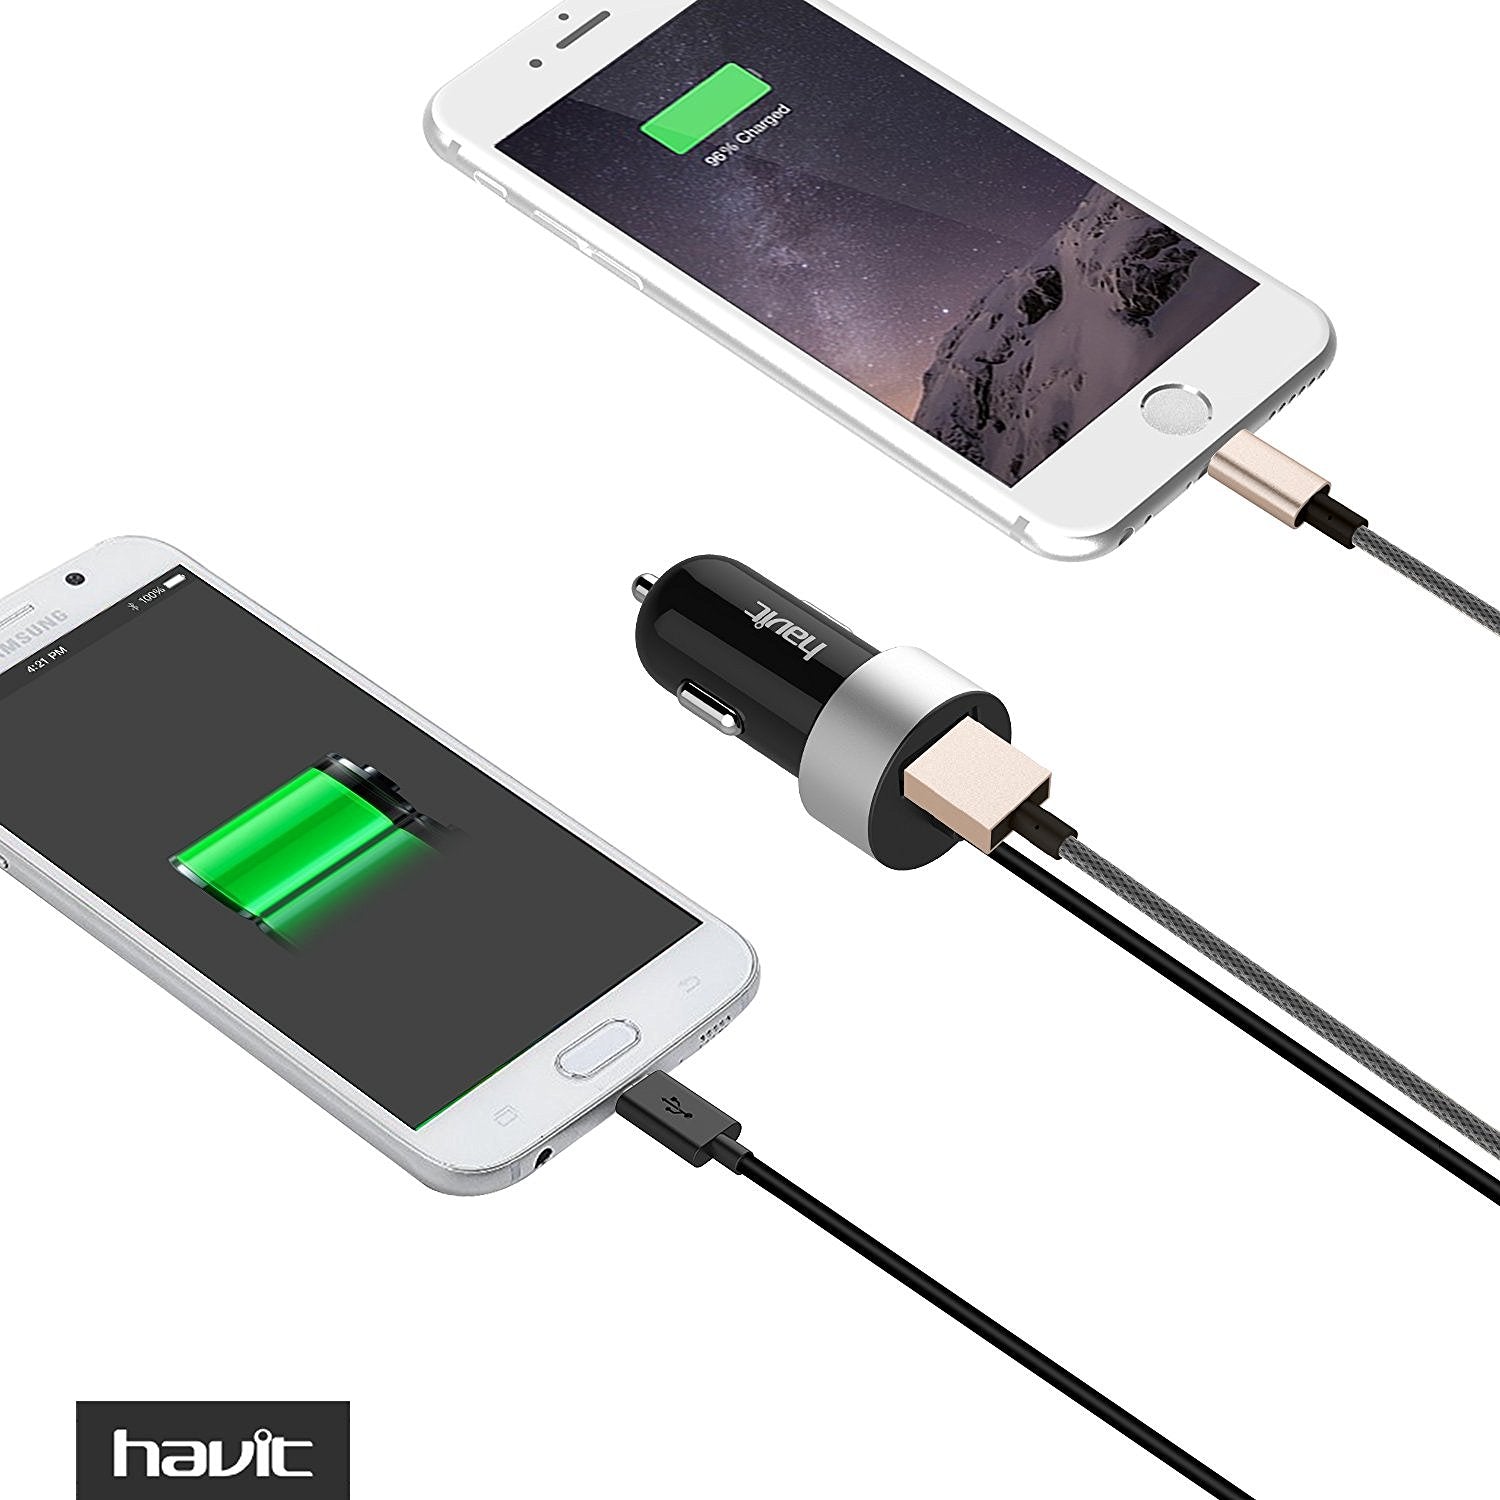 HAVIT HV-UC271 Car Charger Adapter with Coiled Micro USB Universal Cable